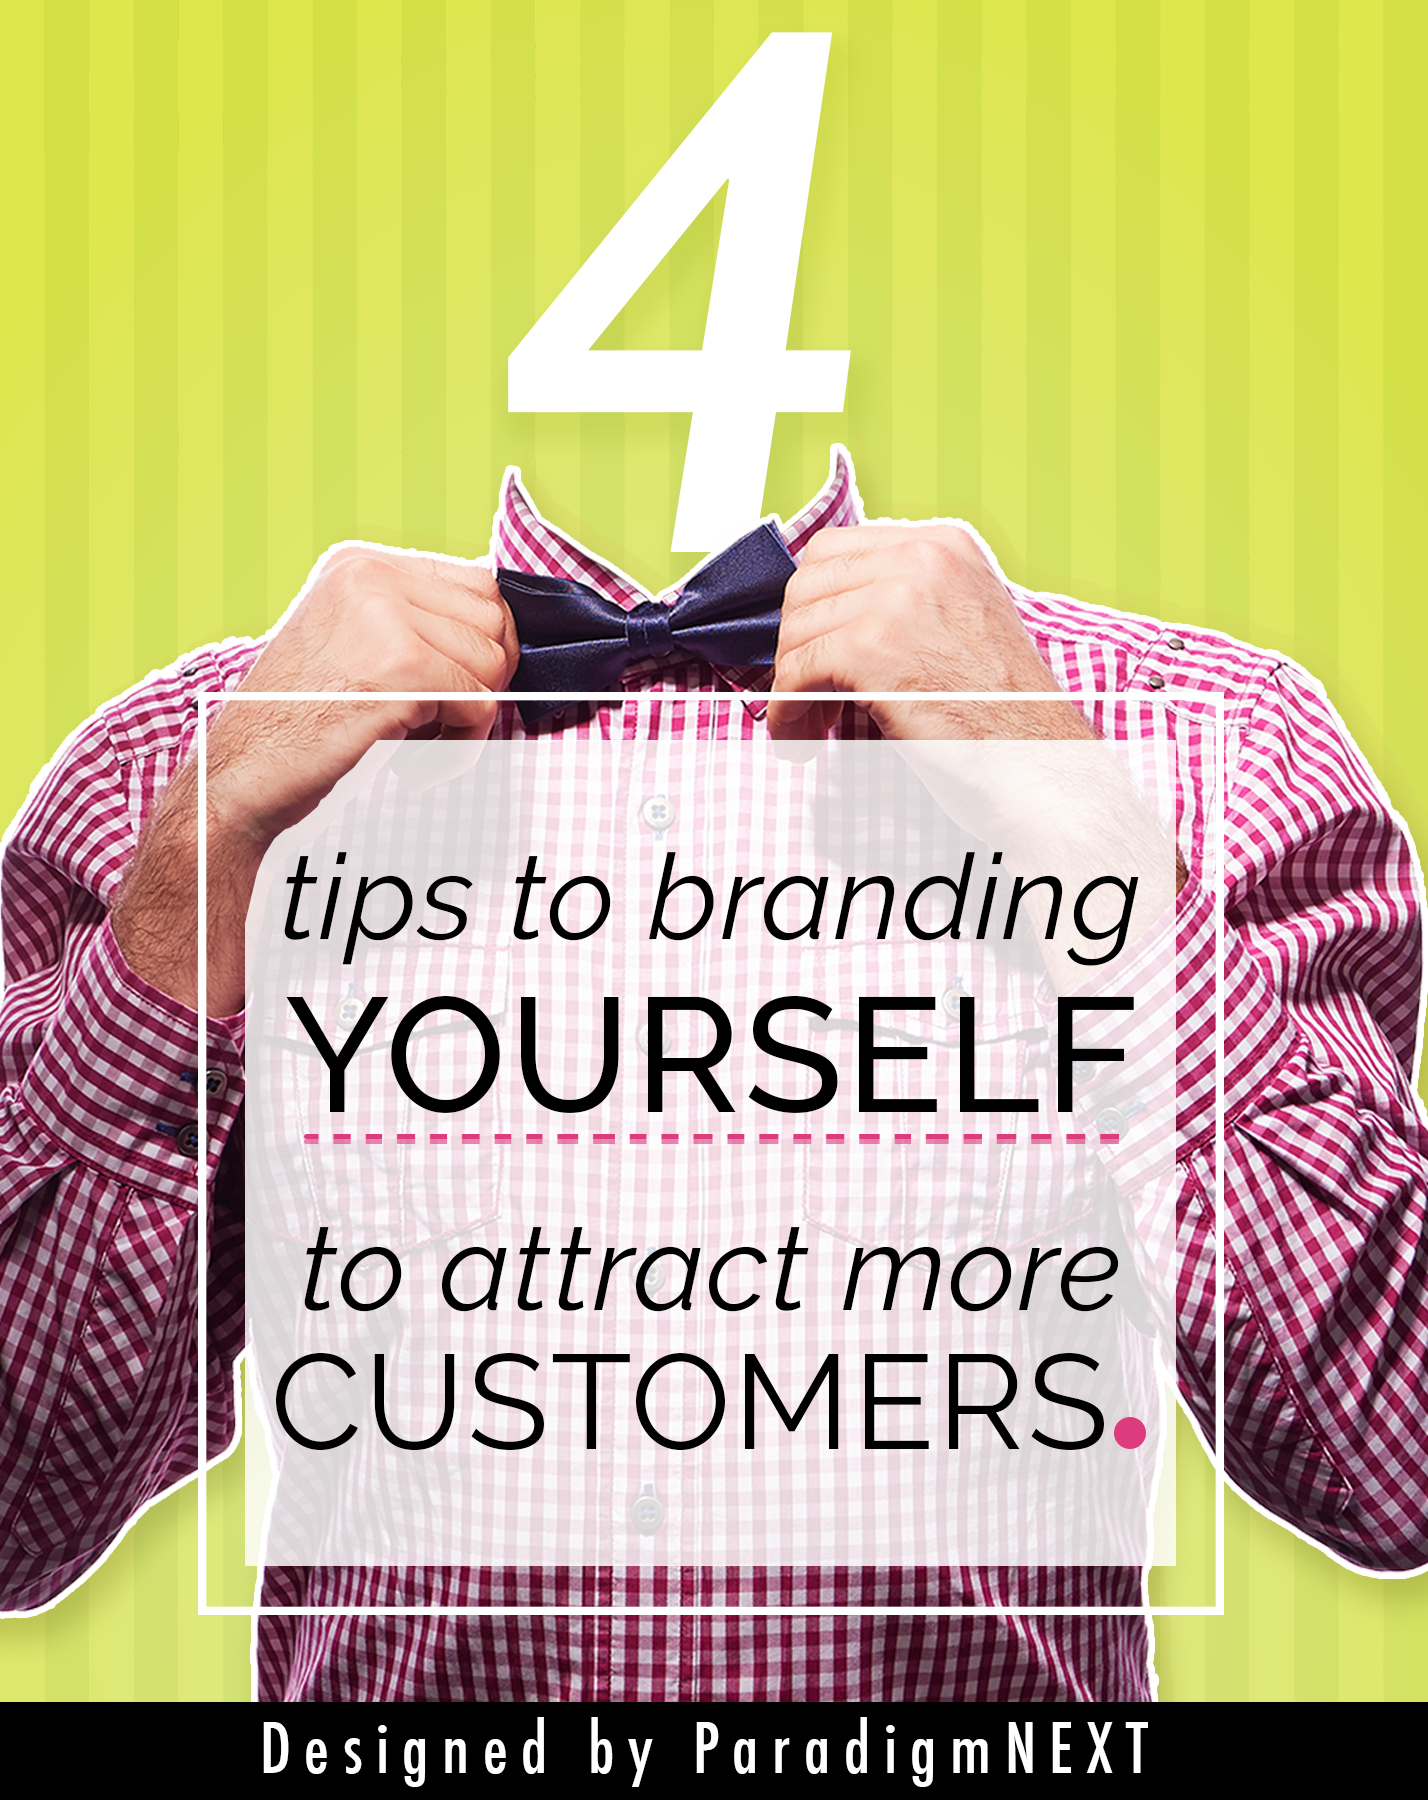 ParadigmNEXT: 4 Tips to Branding Yourself to Attract More Customers